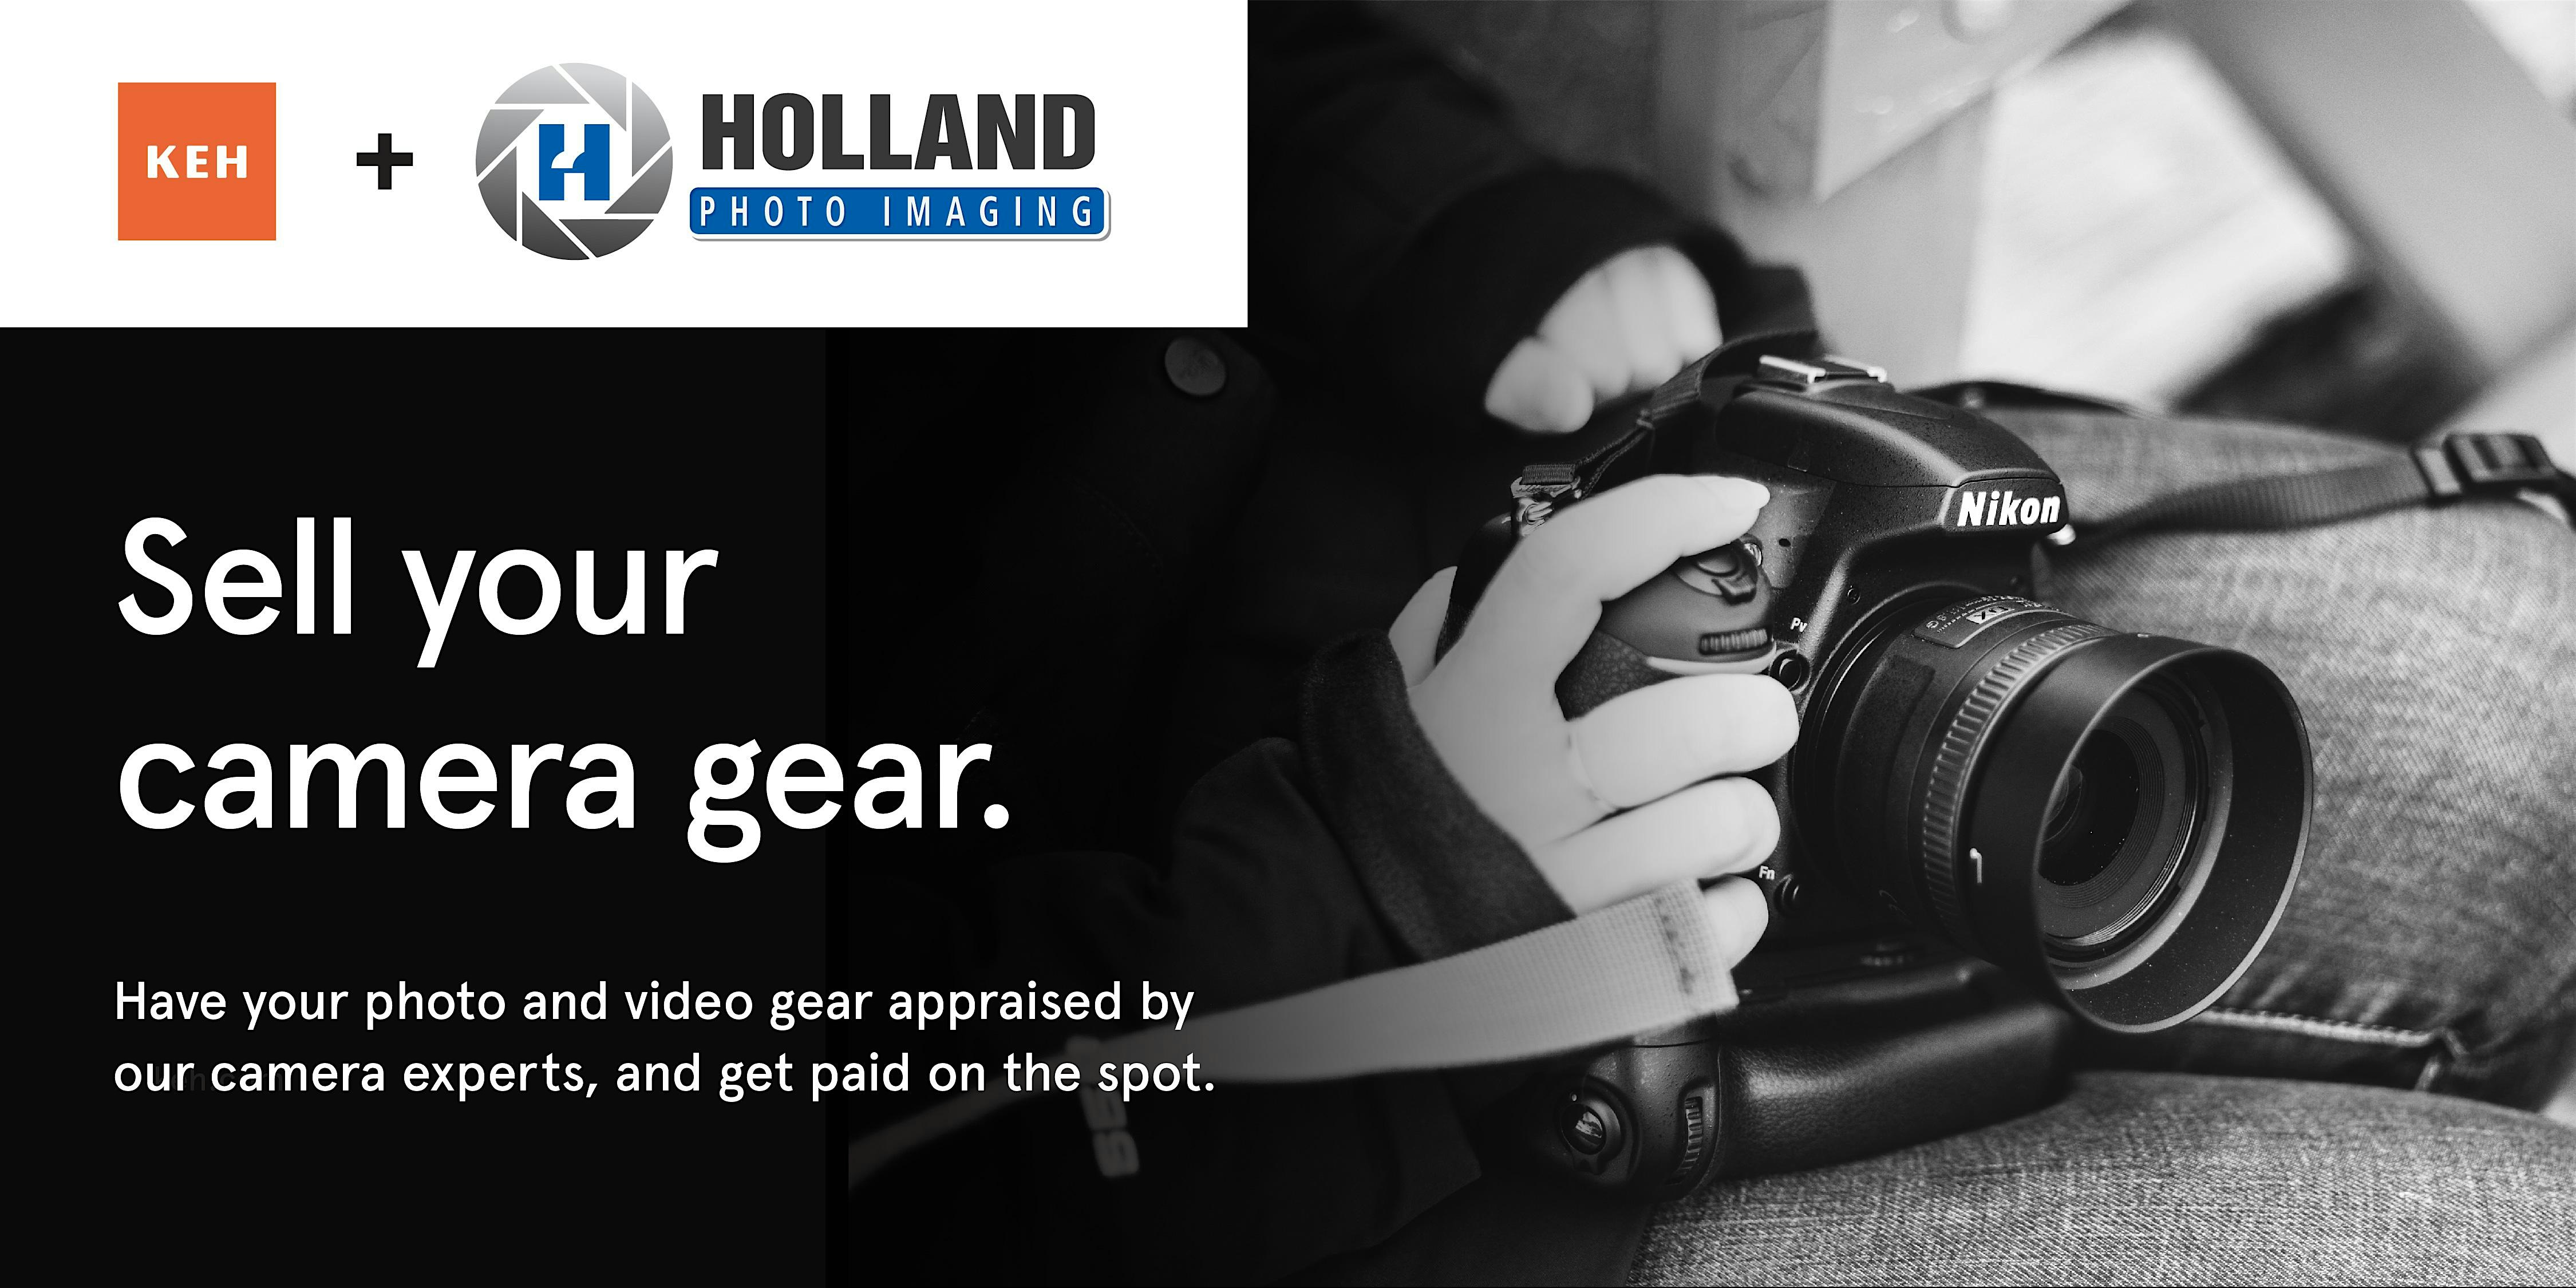 Sell your camera gear (free event) at Holland Photo Imaging